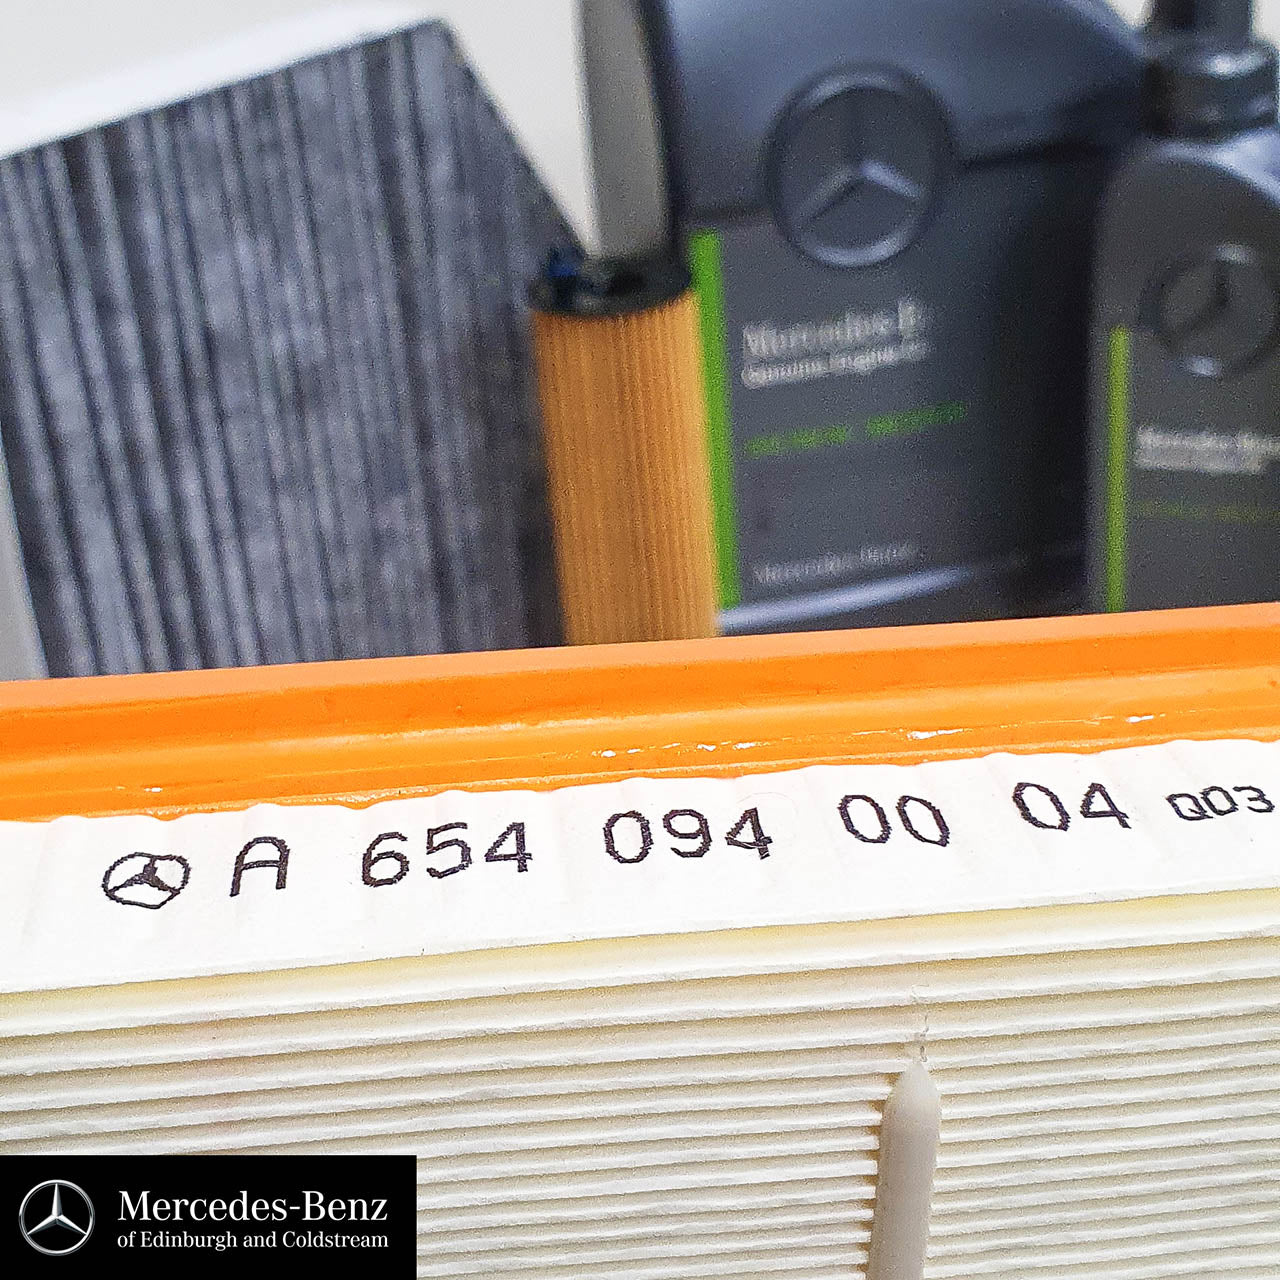 Genuine Mercedes Service Kit E Class w213 OM654 DIESEL engine oil and filters - service kit